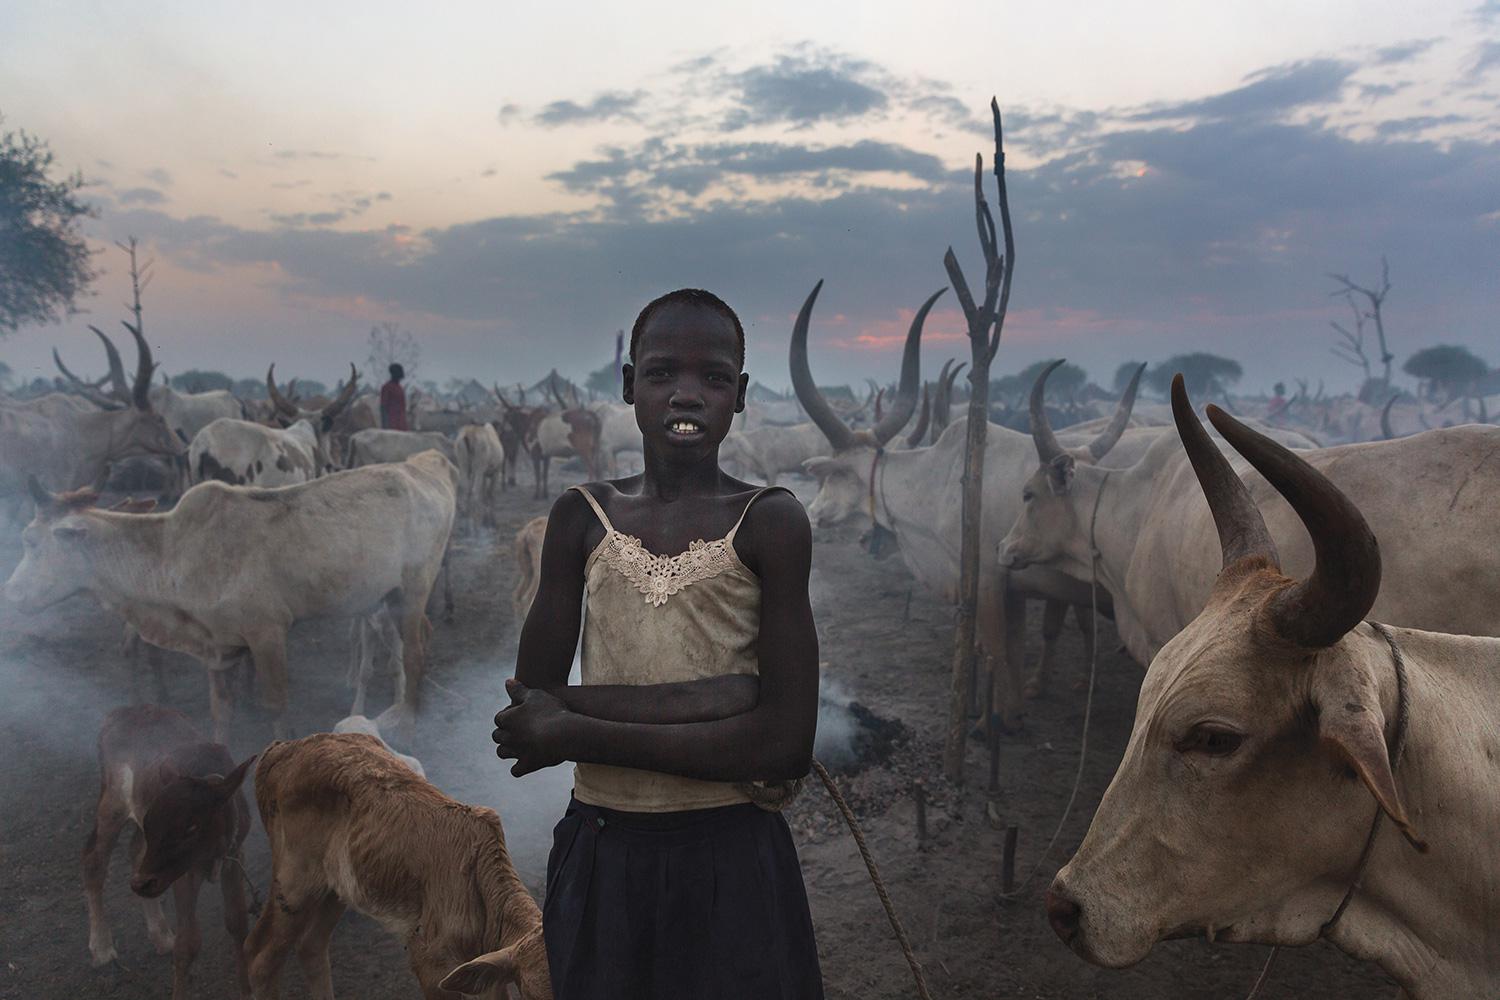 A young, unmarried girl stands amid a herd of cattle outside Bor, the capital of Jonglei State.  Cattle carry significant social, economic, and cultural importance for South Sudan's pastoralist ethnic groups, which use cows for payment of dowry.